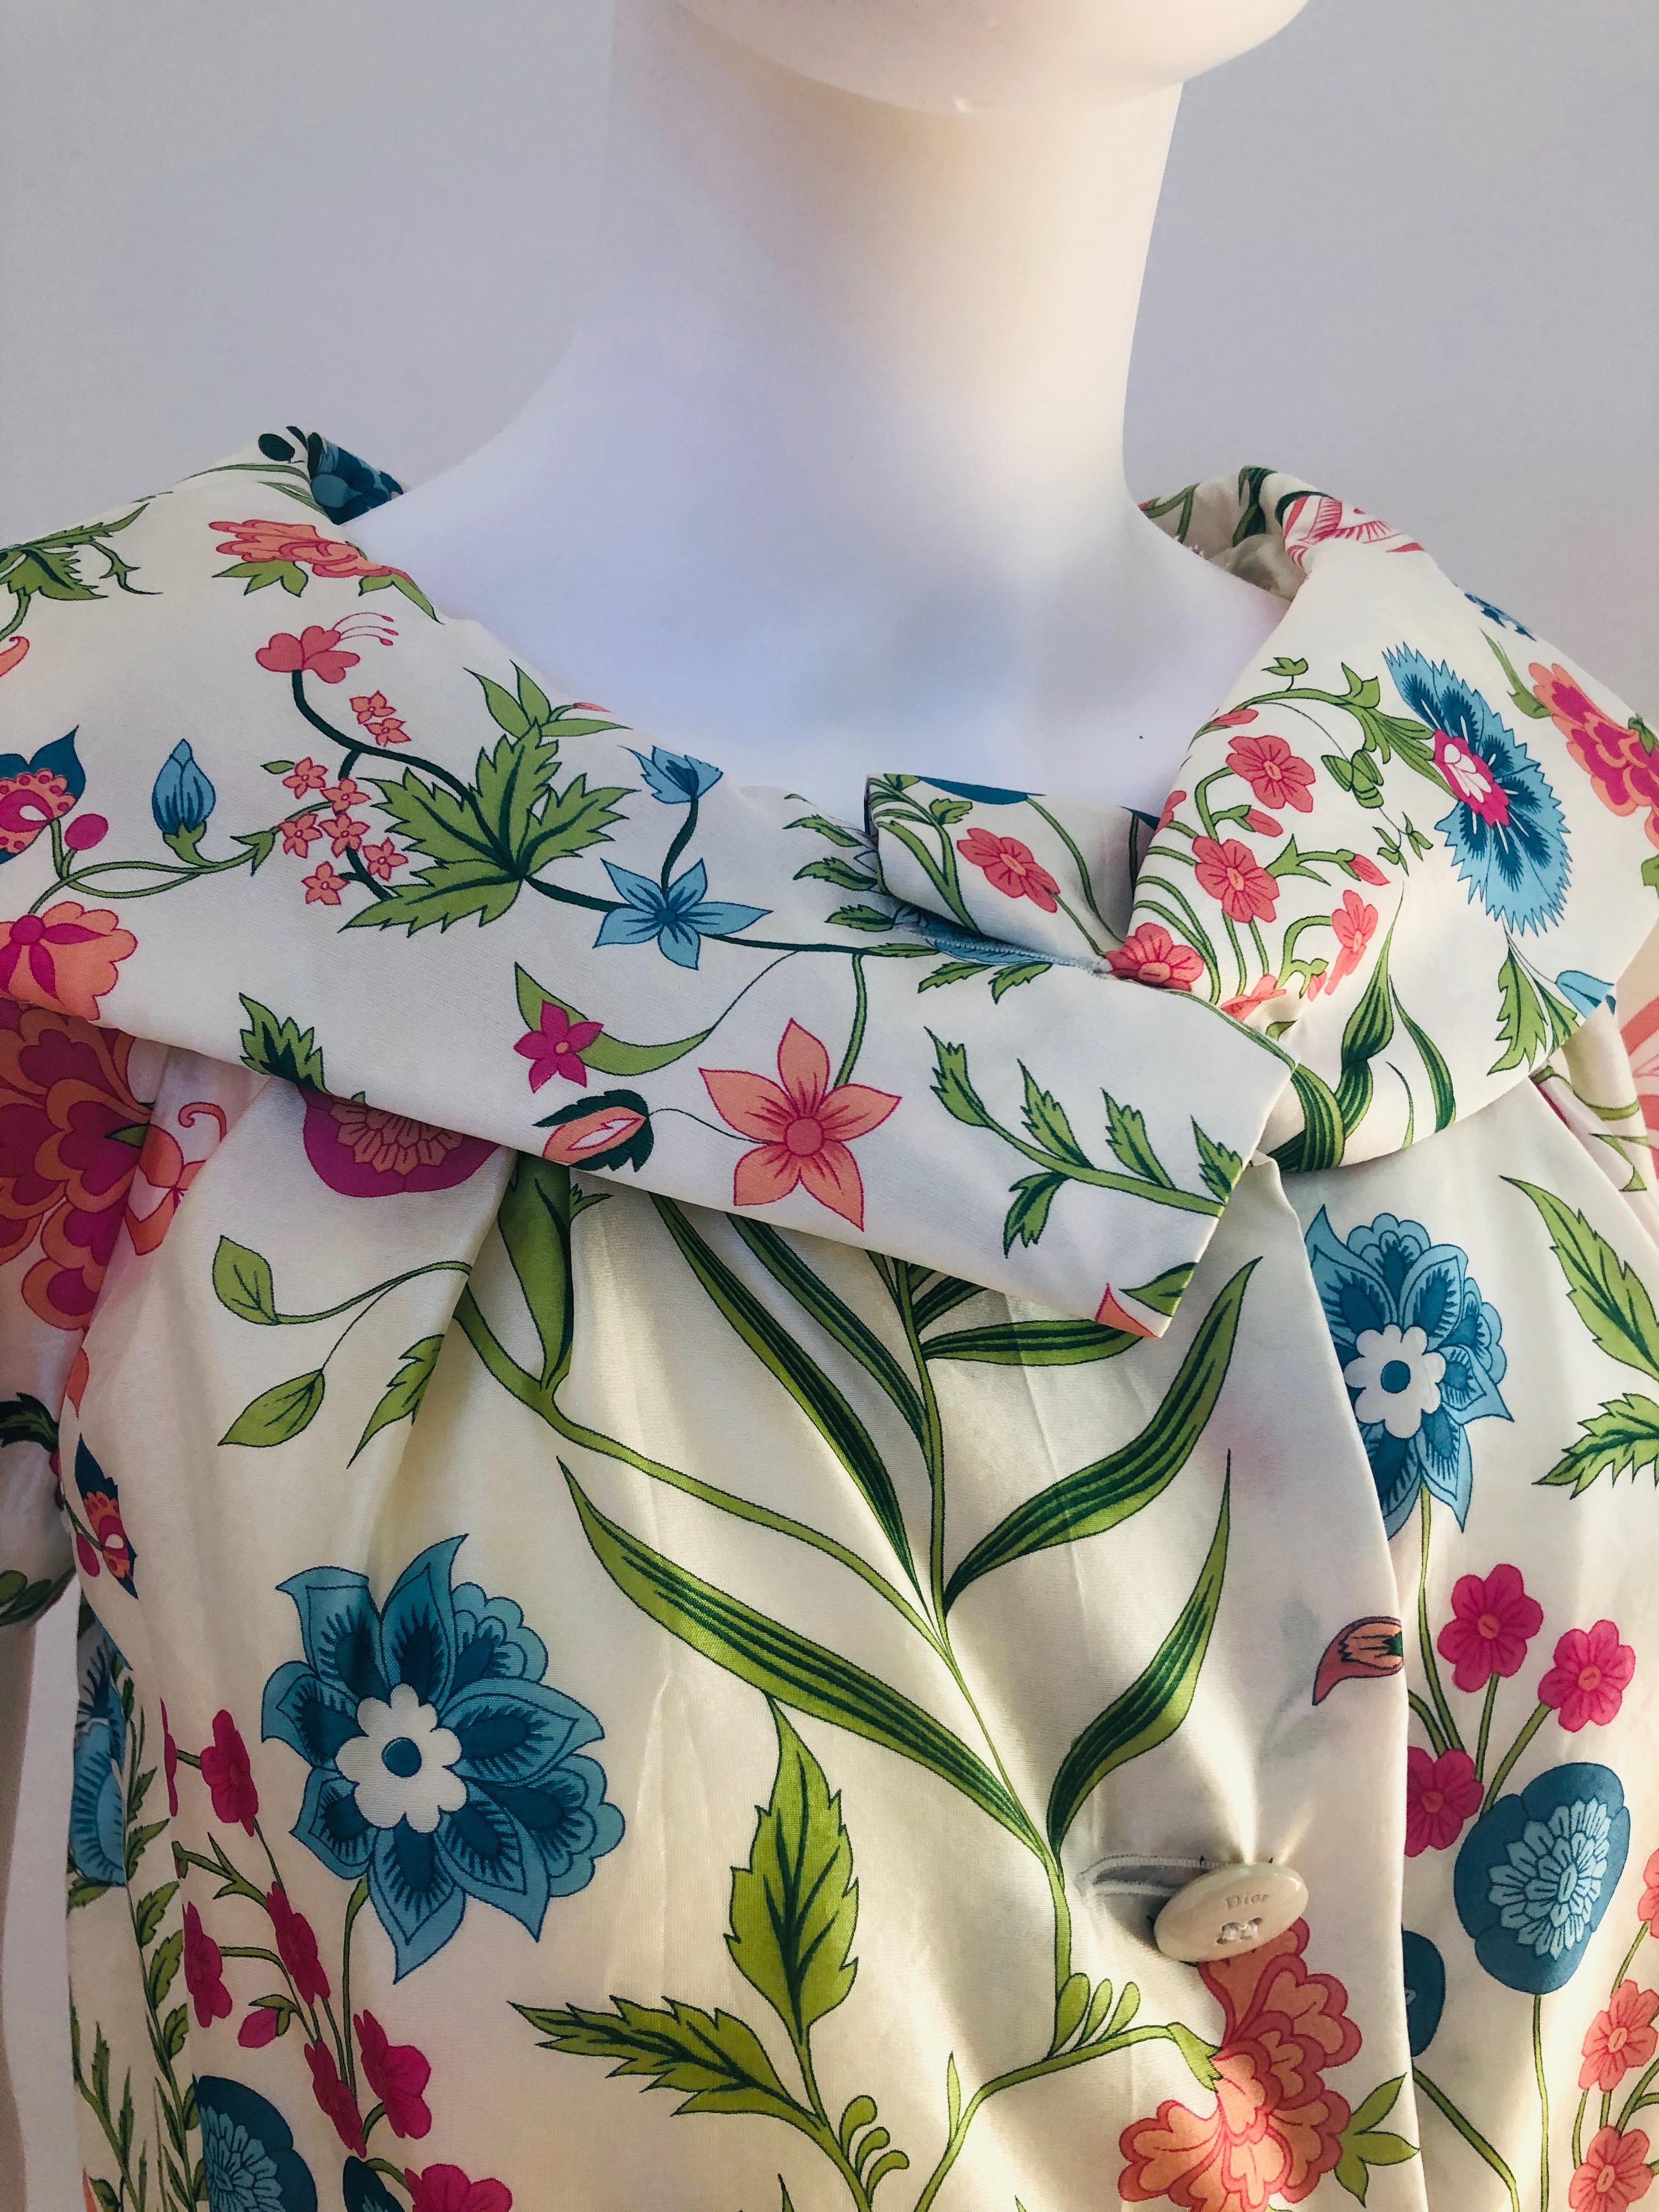 Offered is an early 2000 Christian Dior (purchased at the Dior boutique in Aspen) charmeuse silk shawl collar short evening jacket with an off-white / ivory background an a botanical / floral pattern of pinks, blues and greens.   
Evening jacket/